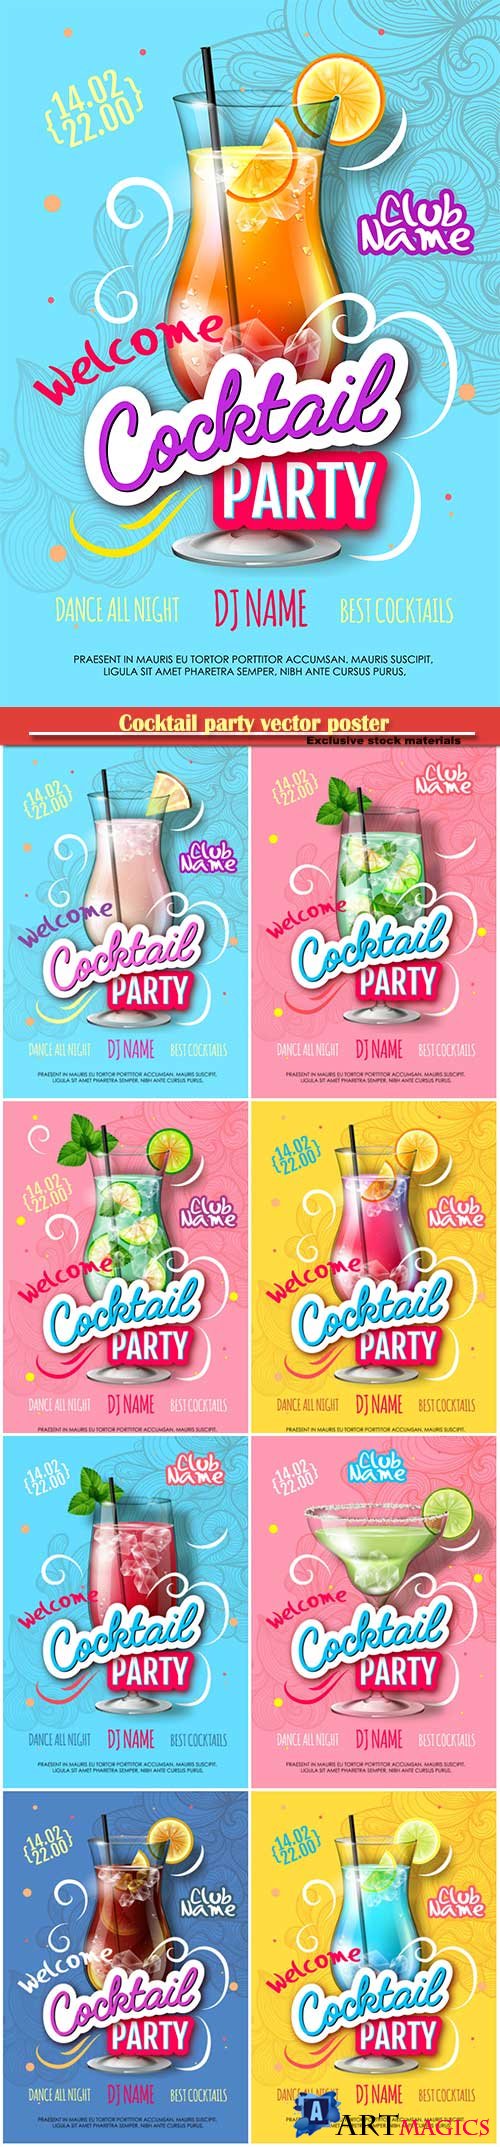 Cocktail party vector poster in modern style, Valentine's Day